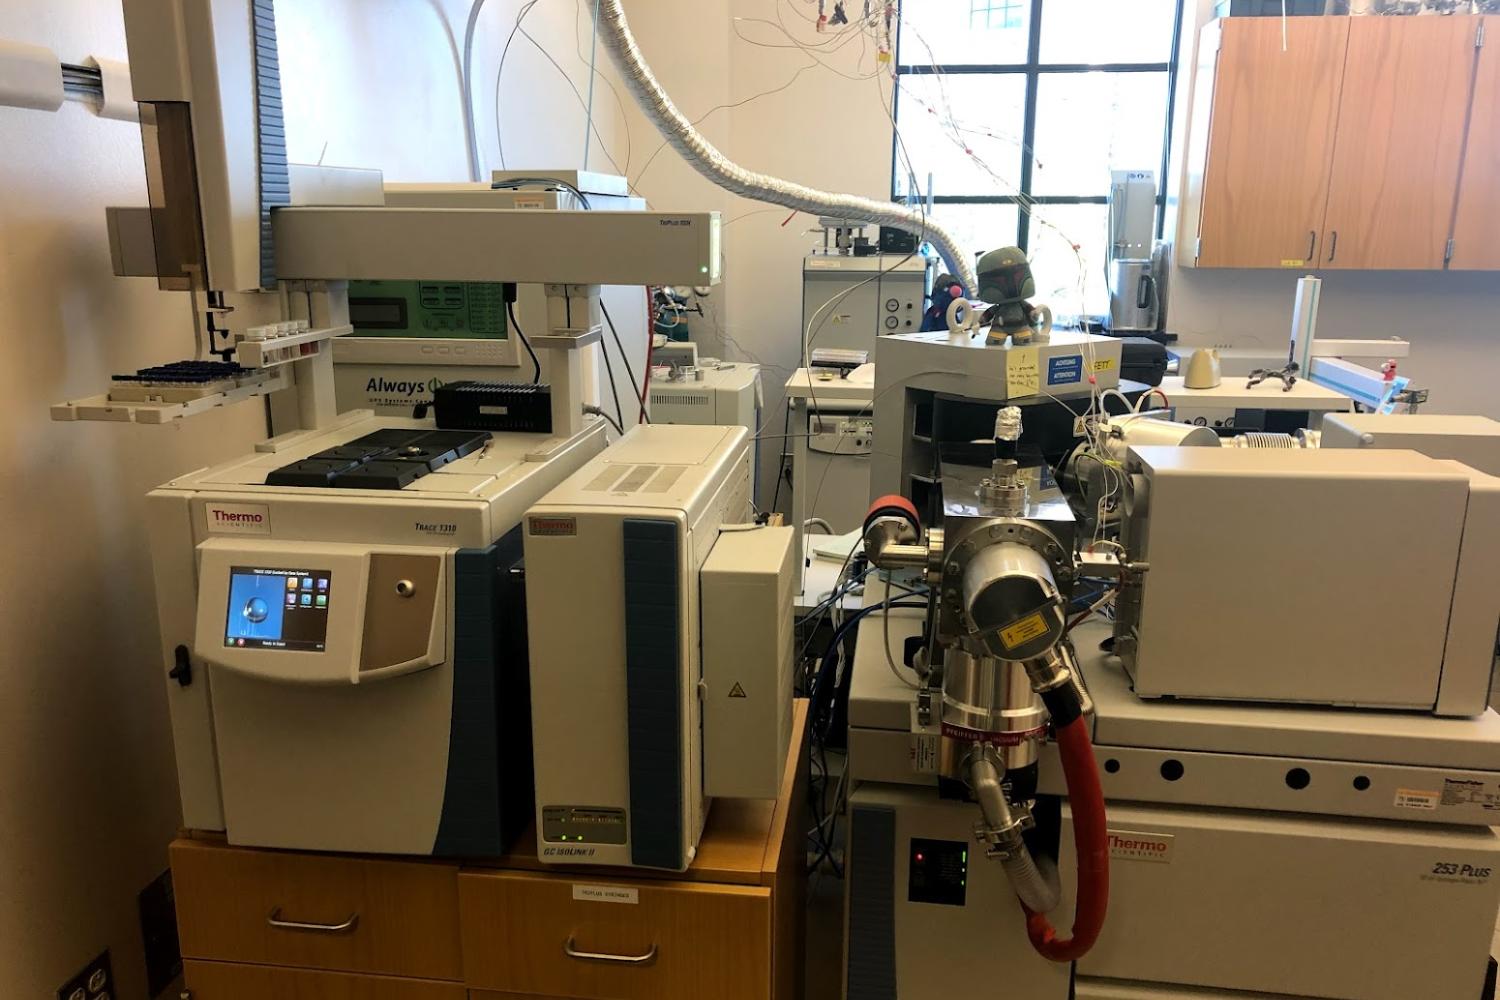 The gas-chromatography MAT253 Plus isotope ratio mass spectrometer.